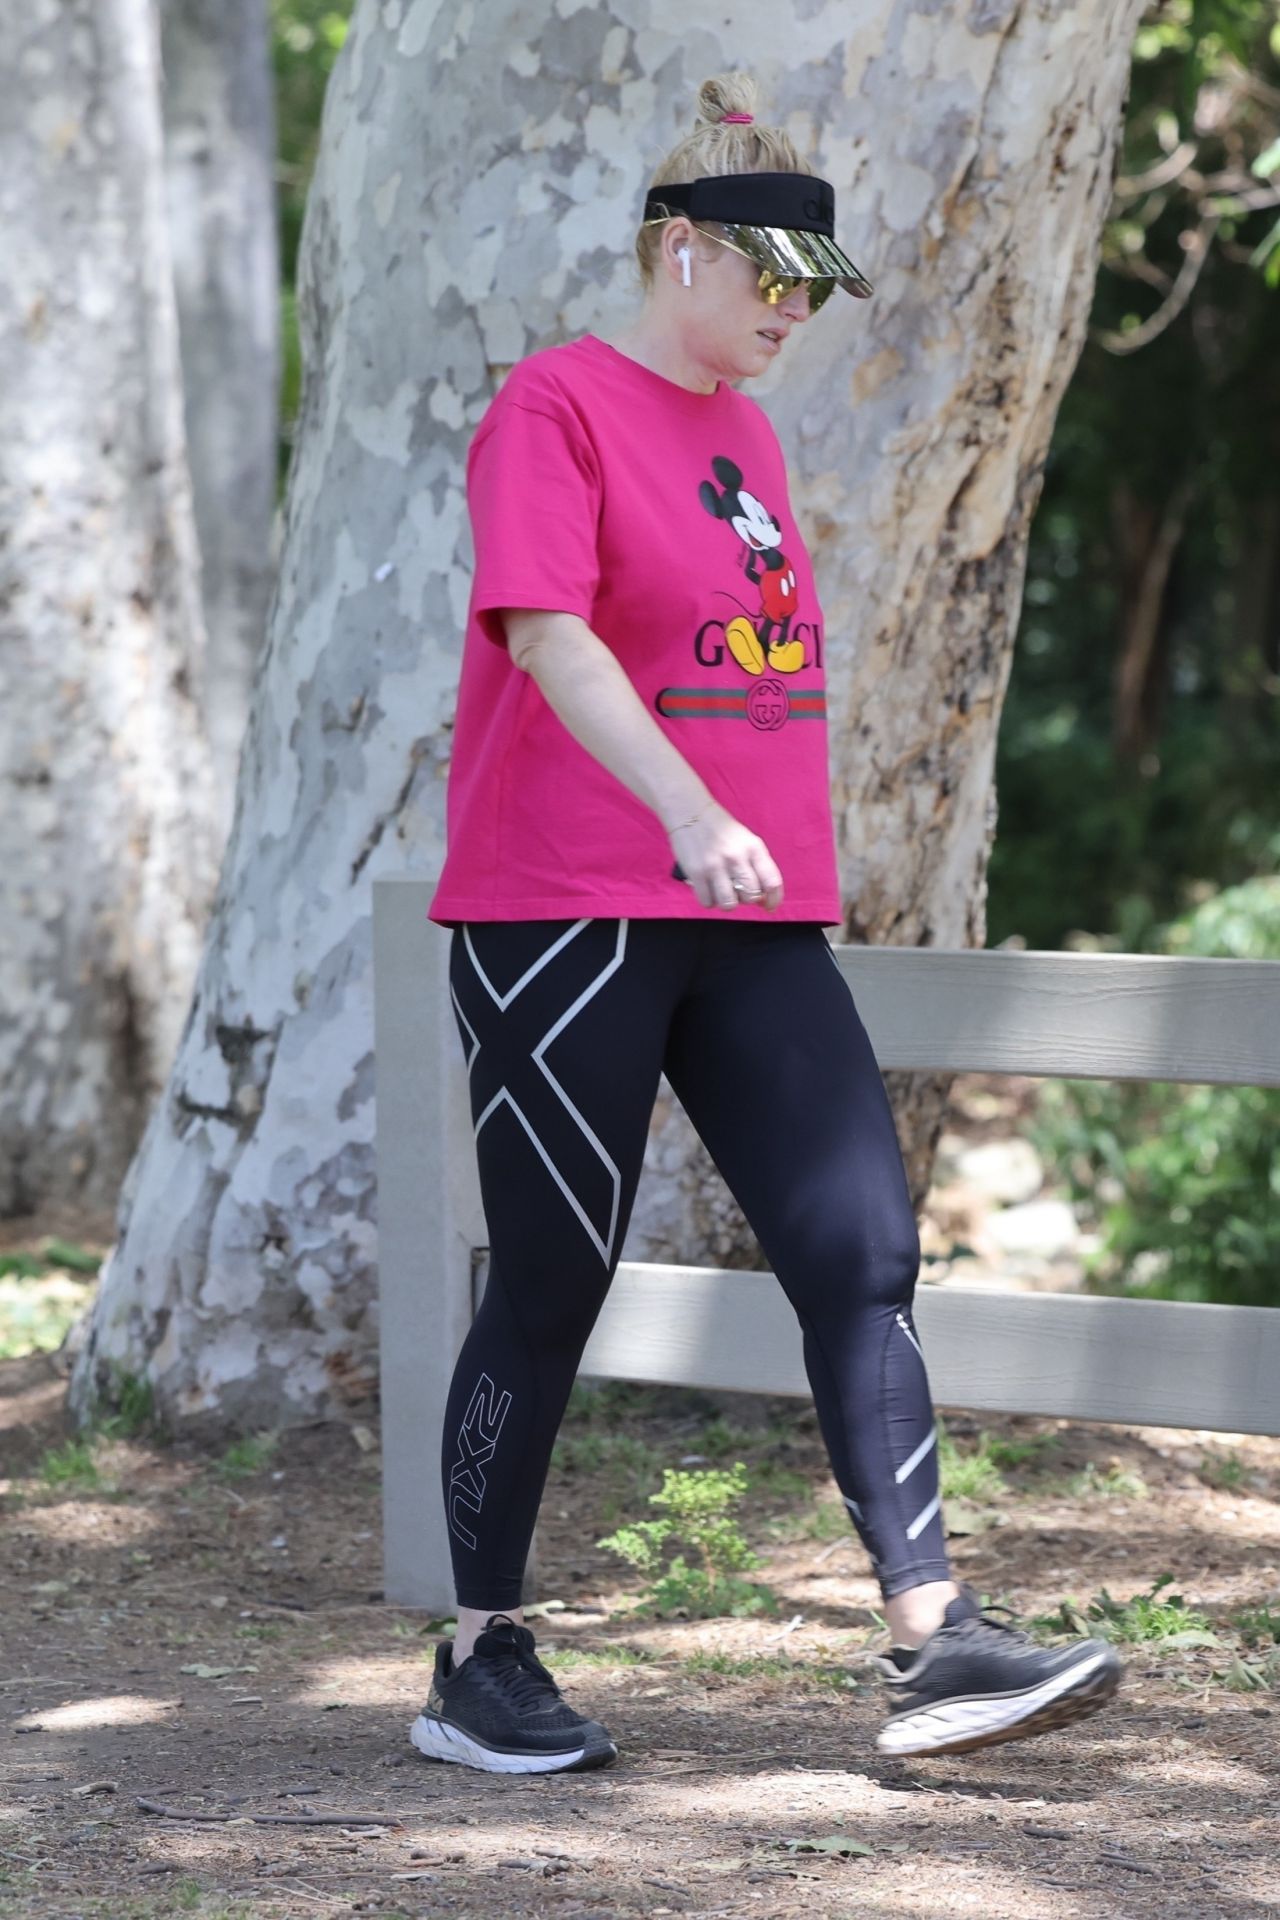 Rebel Wilson Wears a Gucci Mickey Mouse Tee - Griffith Park in LA 05/10 ...